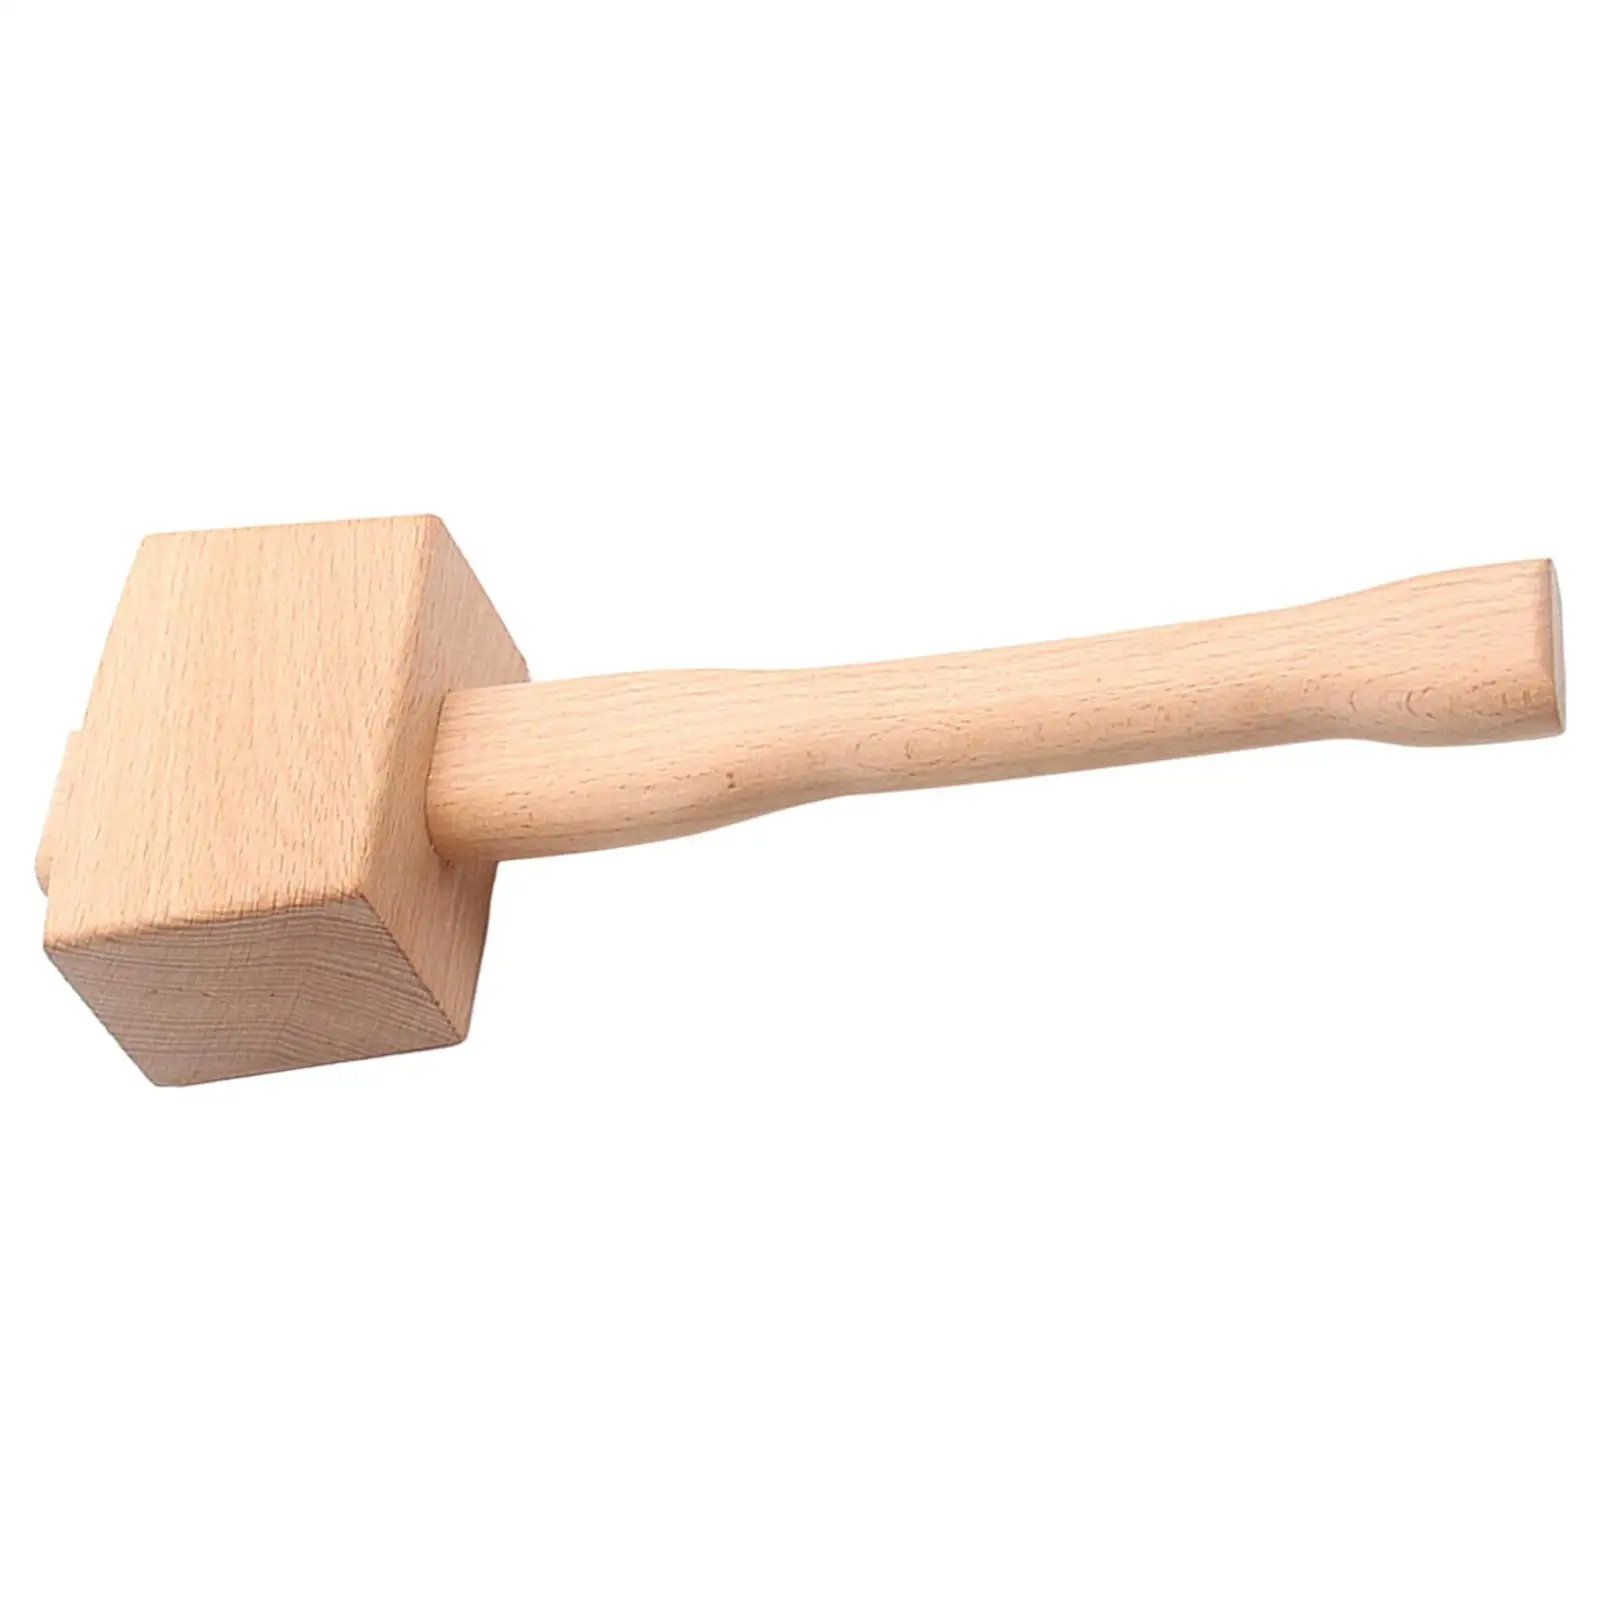 Beech Solid Wood Mallet Hand Tool Durable Beechwood Hammer Malle Portable Mallet Professional Wooden Hammer for Leather Craft